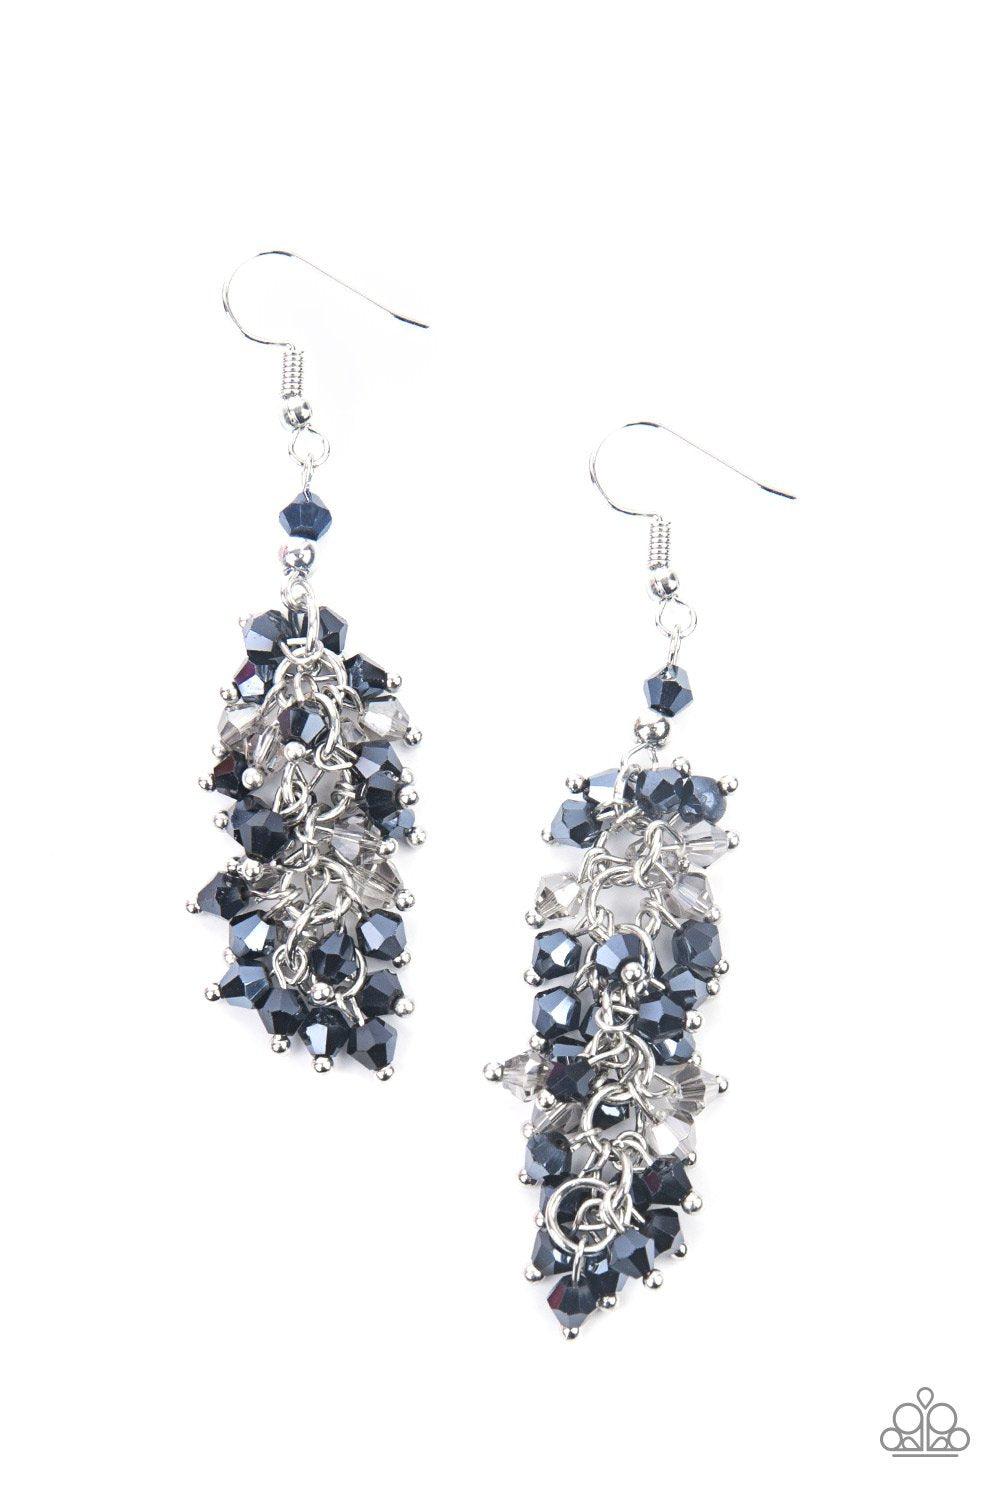 Celestial Chandeliers Blue Iridescent Earrings - Paparazzi Accessories- lightbox - CarasShop.com - $5 Jewelry by Cara Jewels